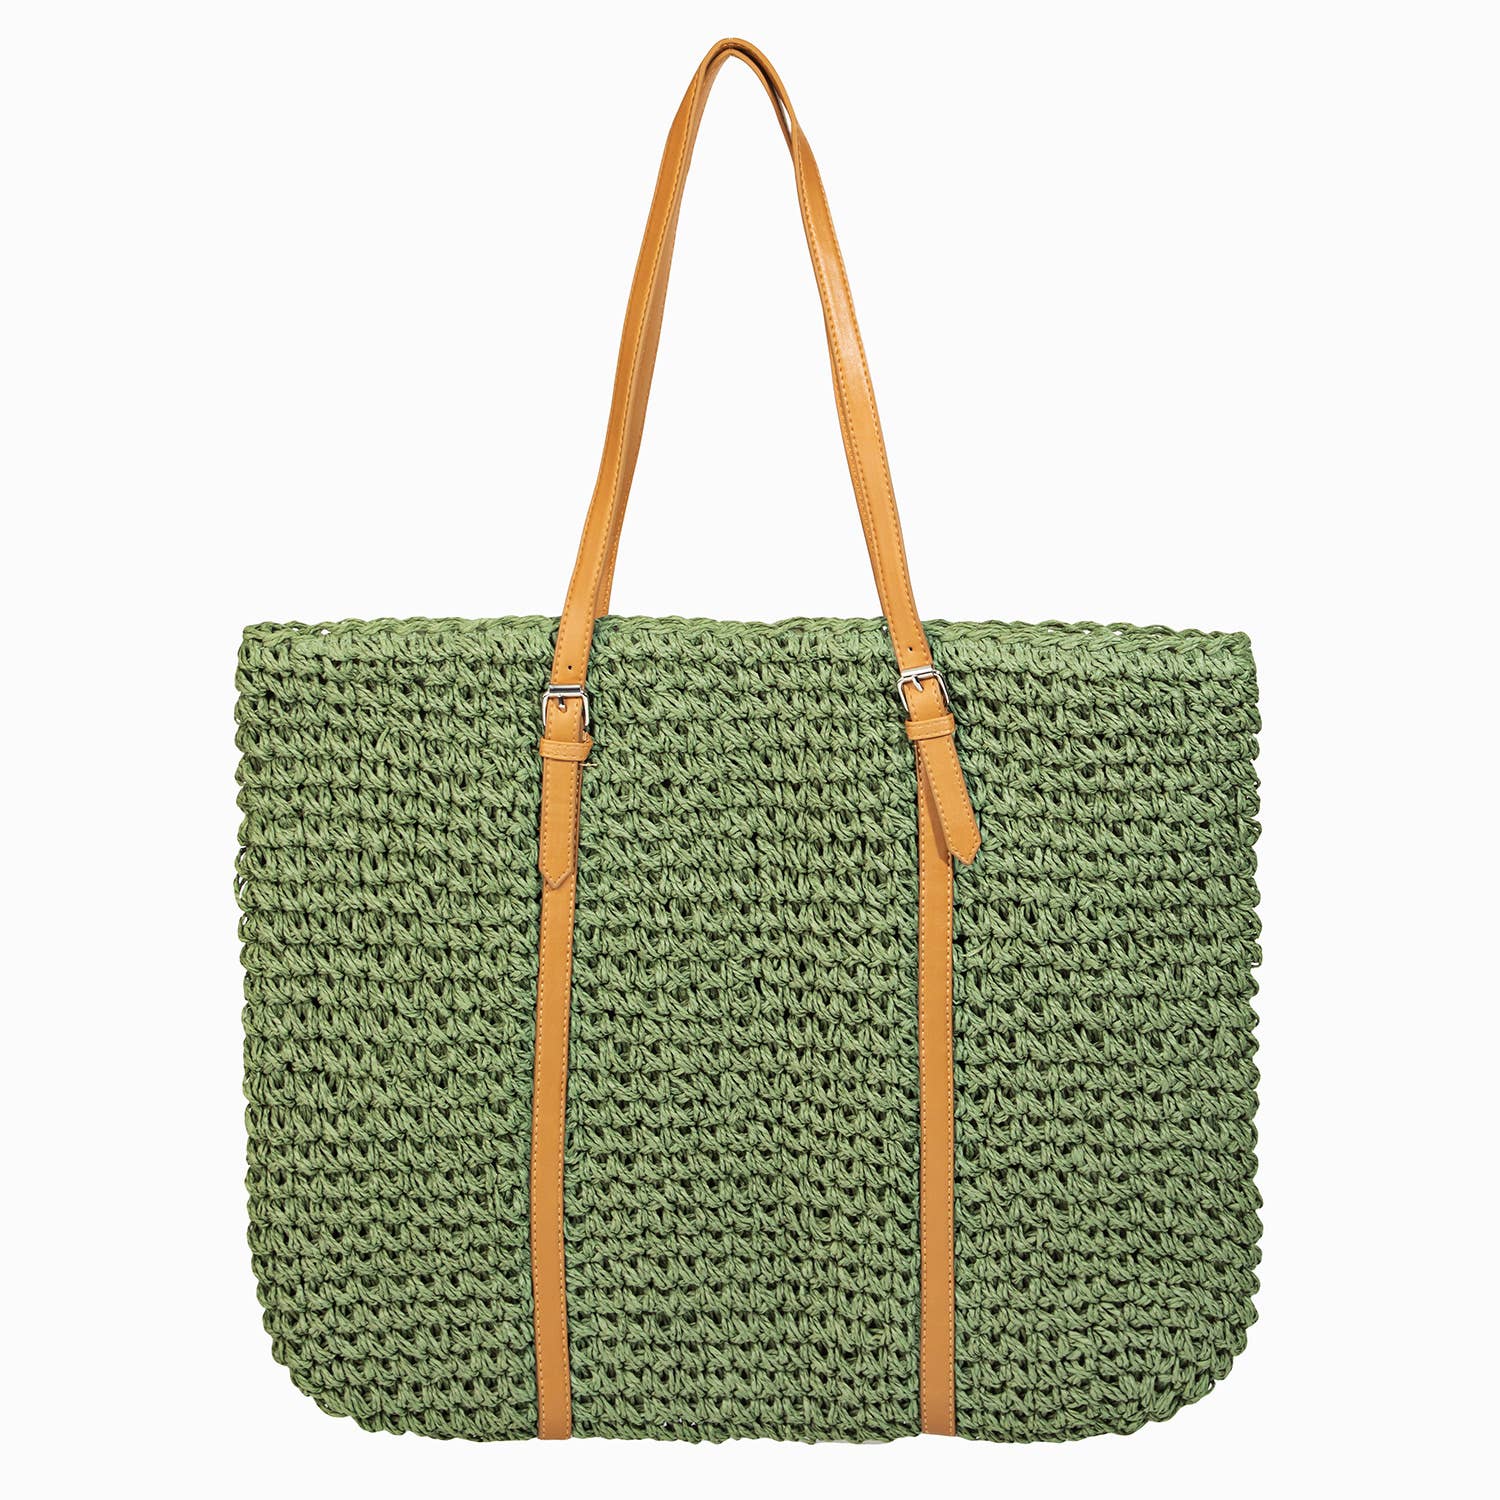 Straw Braided Leather Strap Tote Bag